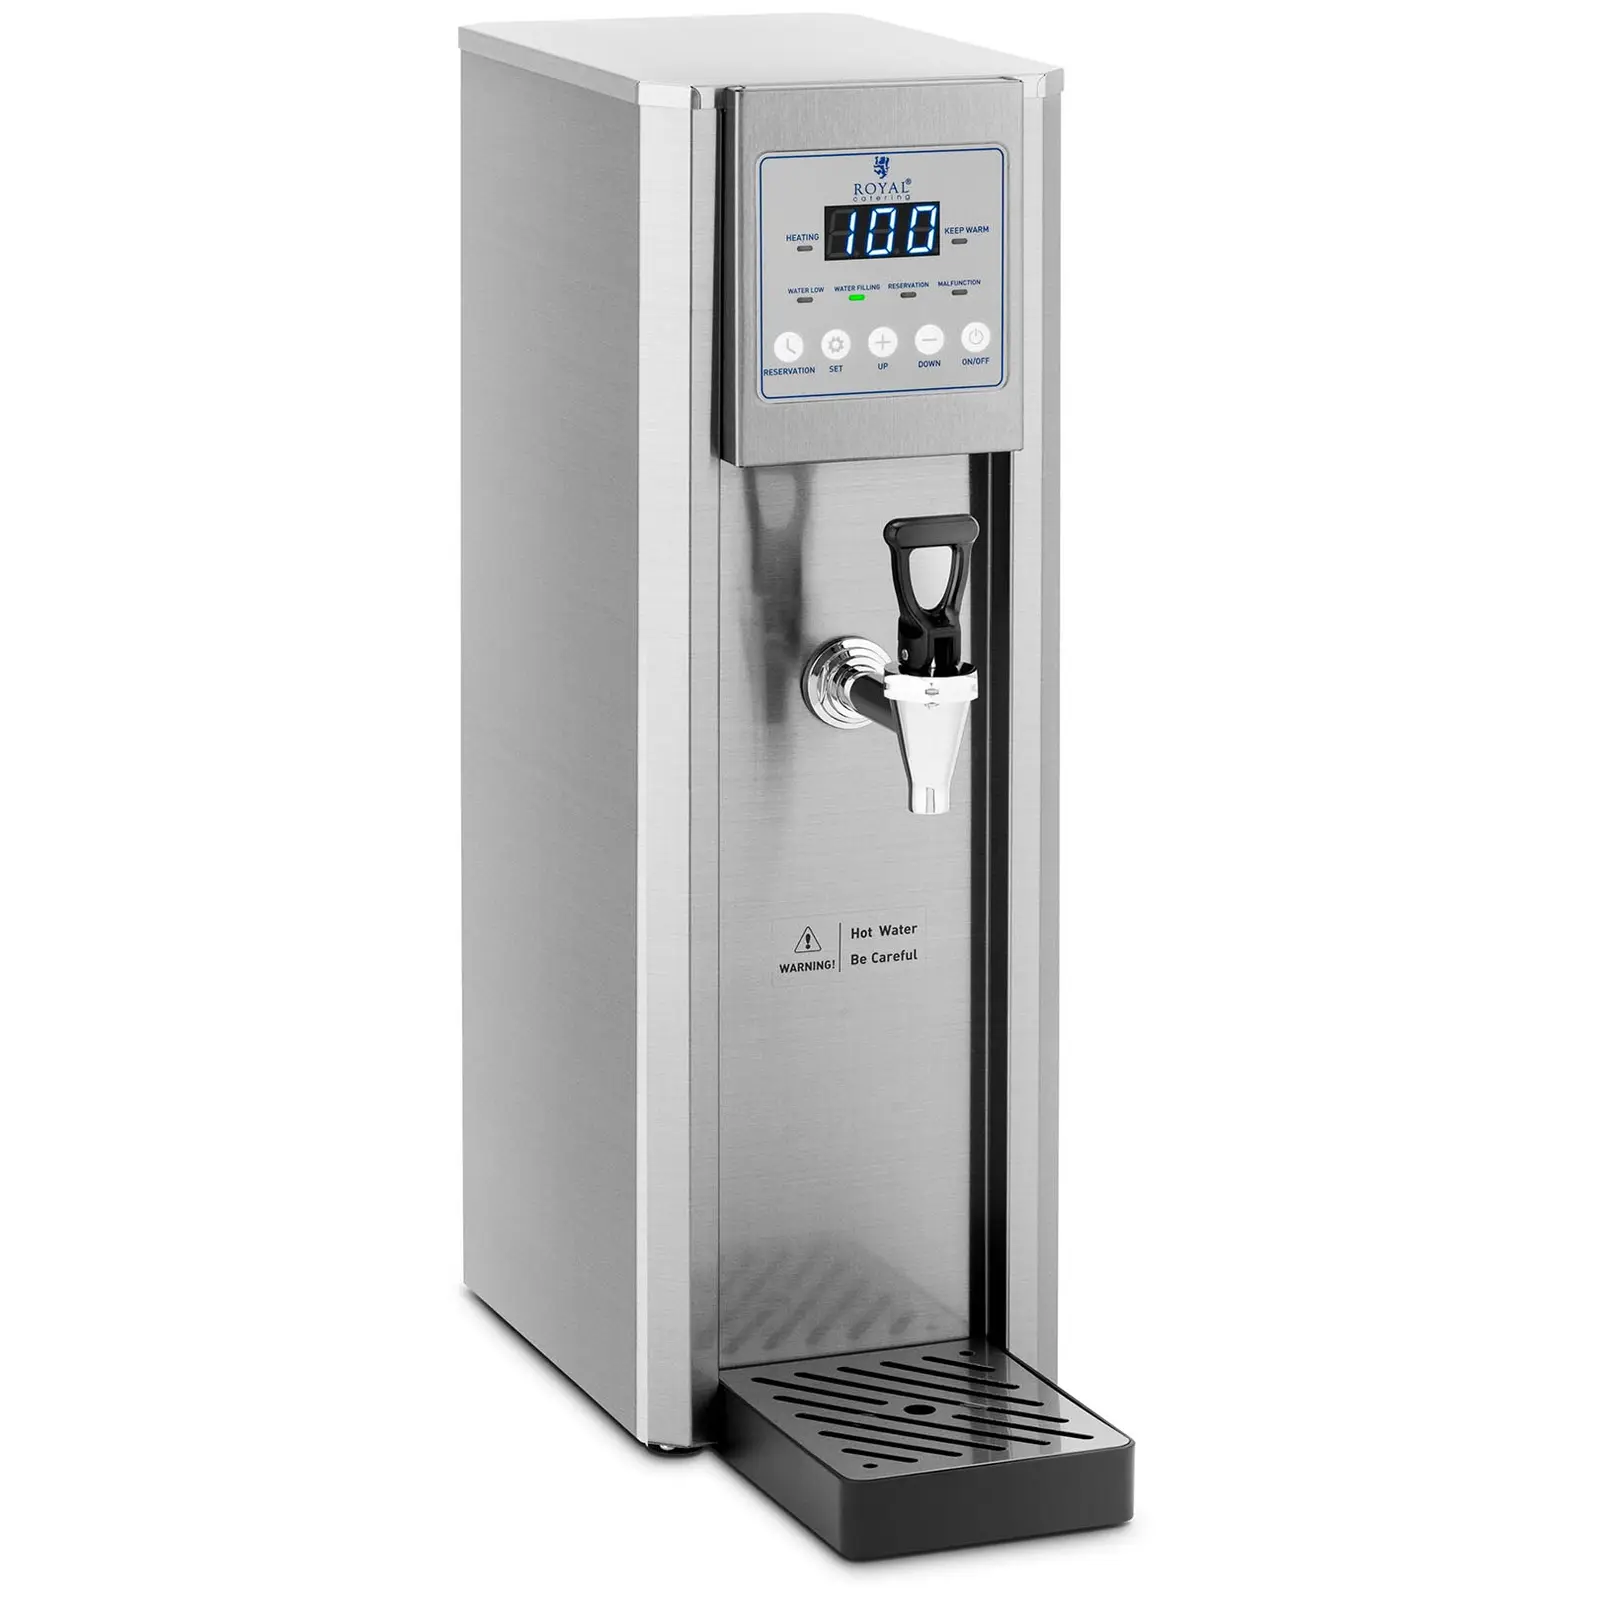 Hot Water Dispenser - 8 L - 2100 W - water connection - Royal Catering